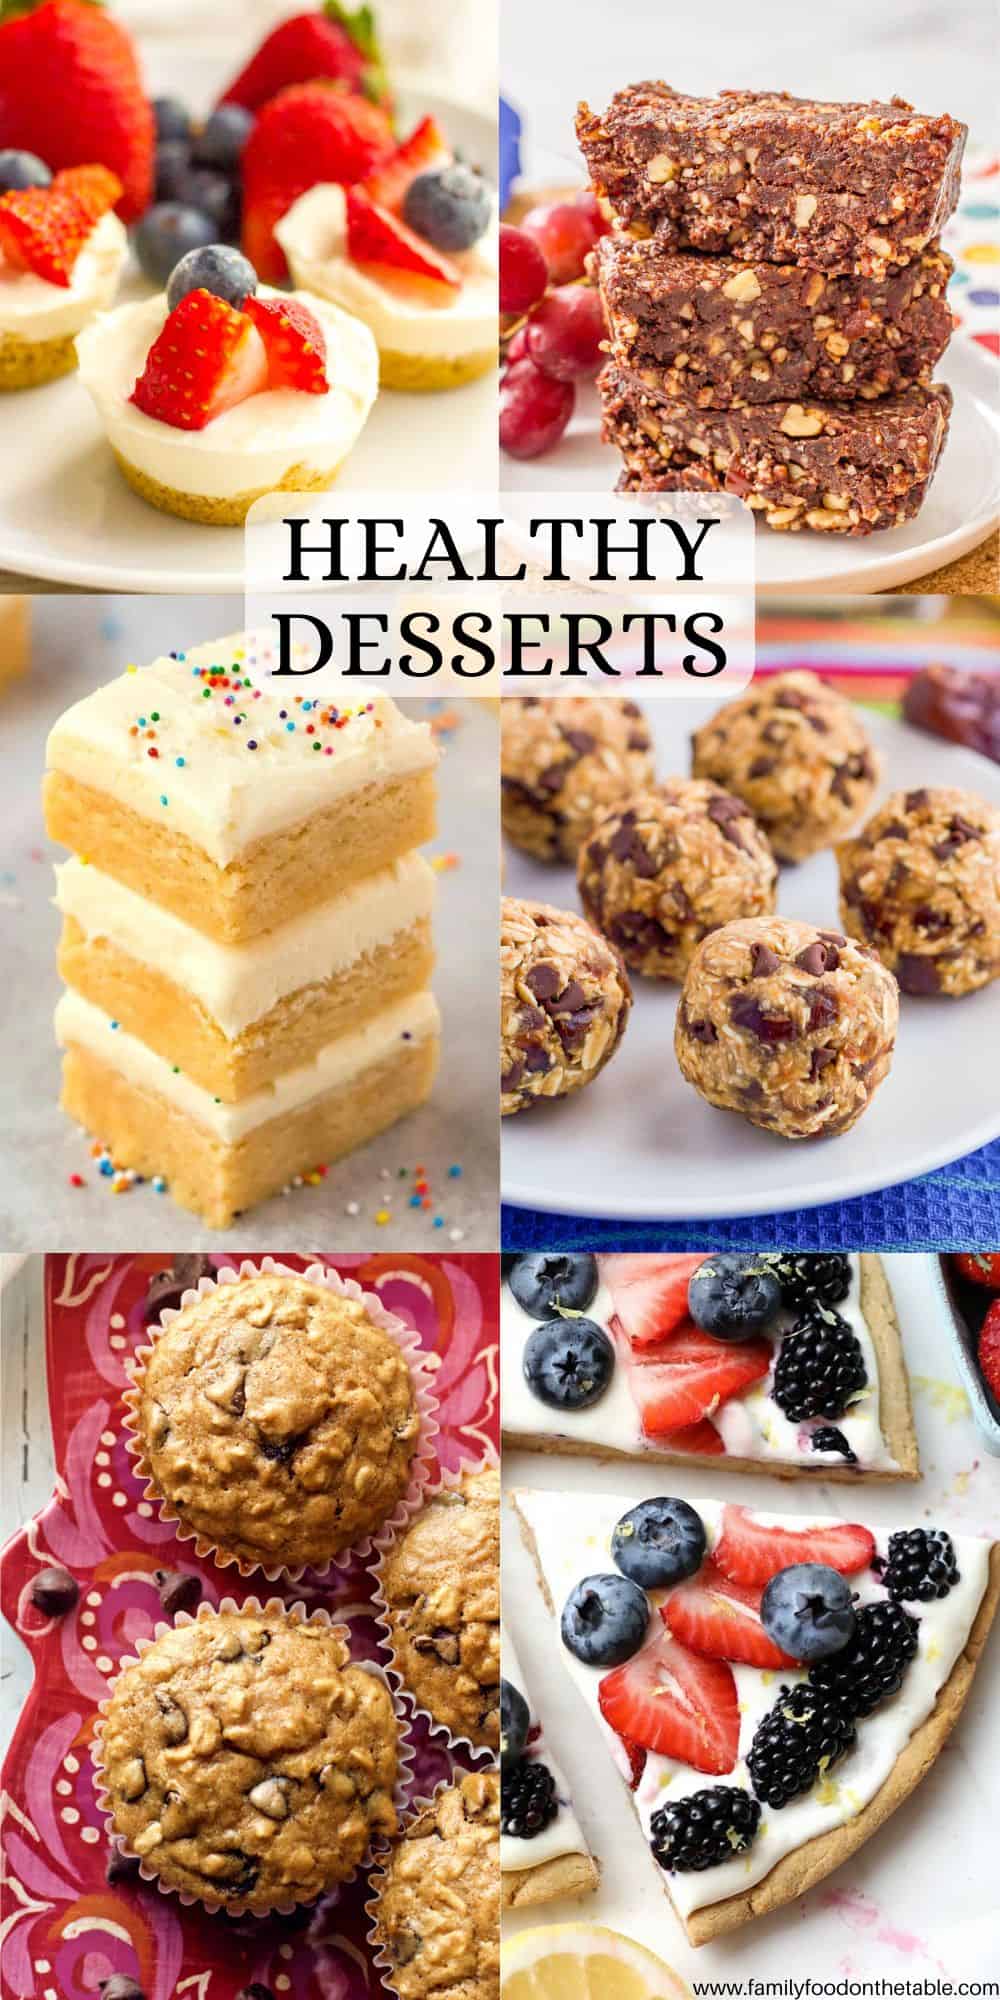 A collage of 6 photos of healthy desserts with a text overlay on the collage.